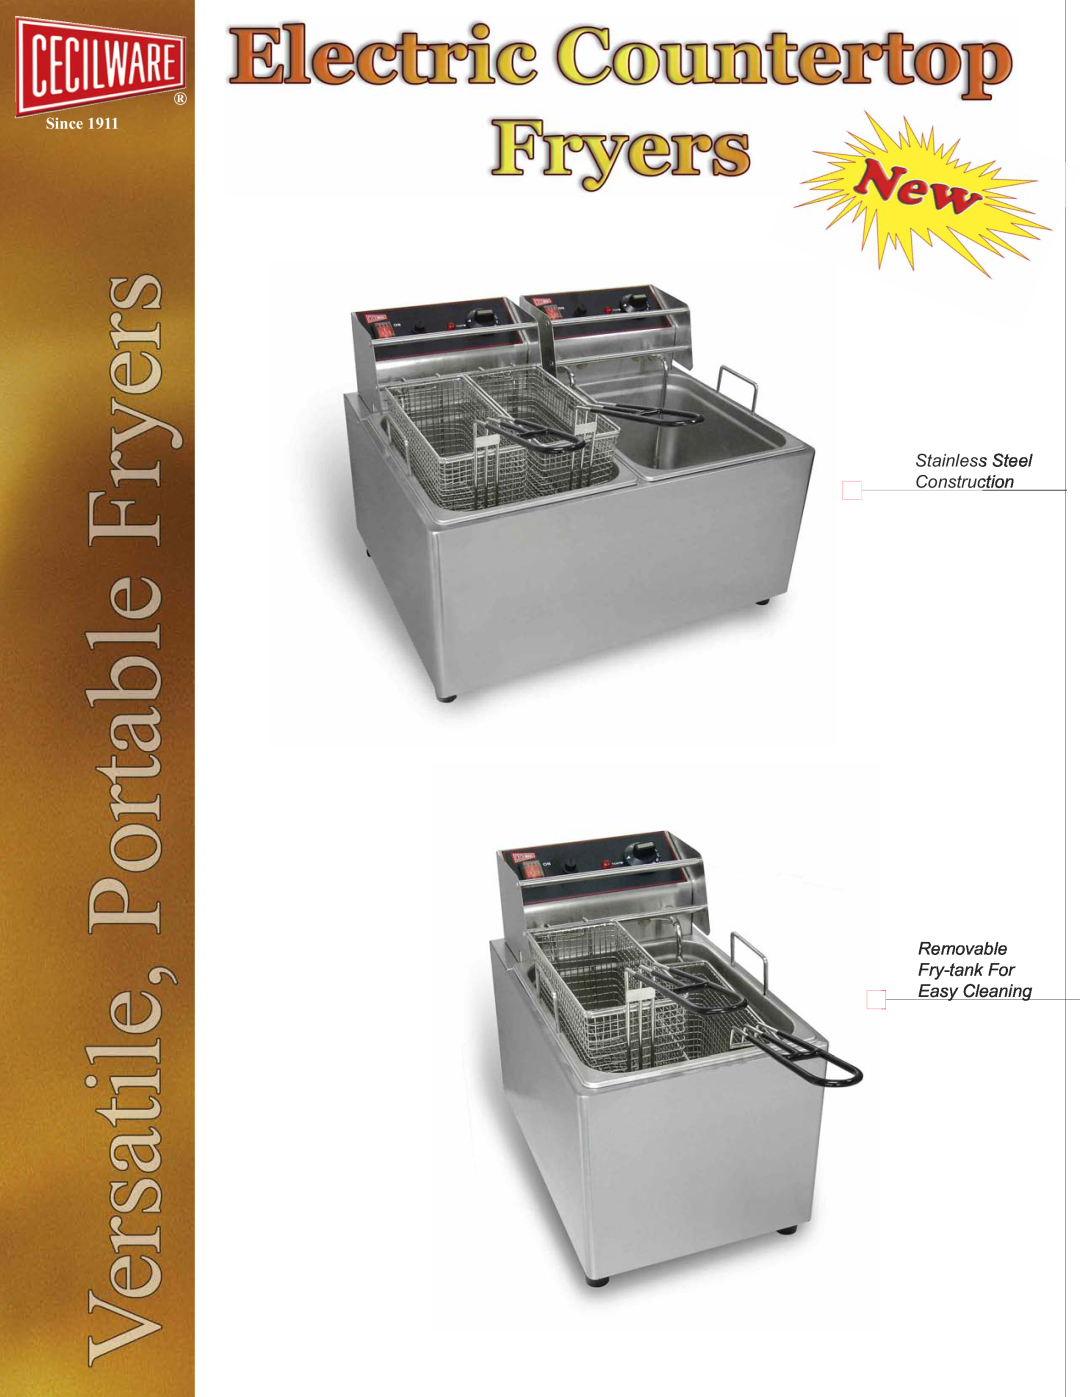 Cecilware Portable Fryers manual Stainless Steel Construction Removable, Fry-tankFor Easy Cleaning, Since 